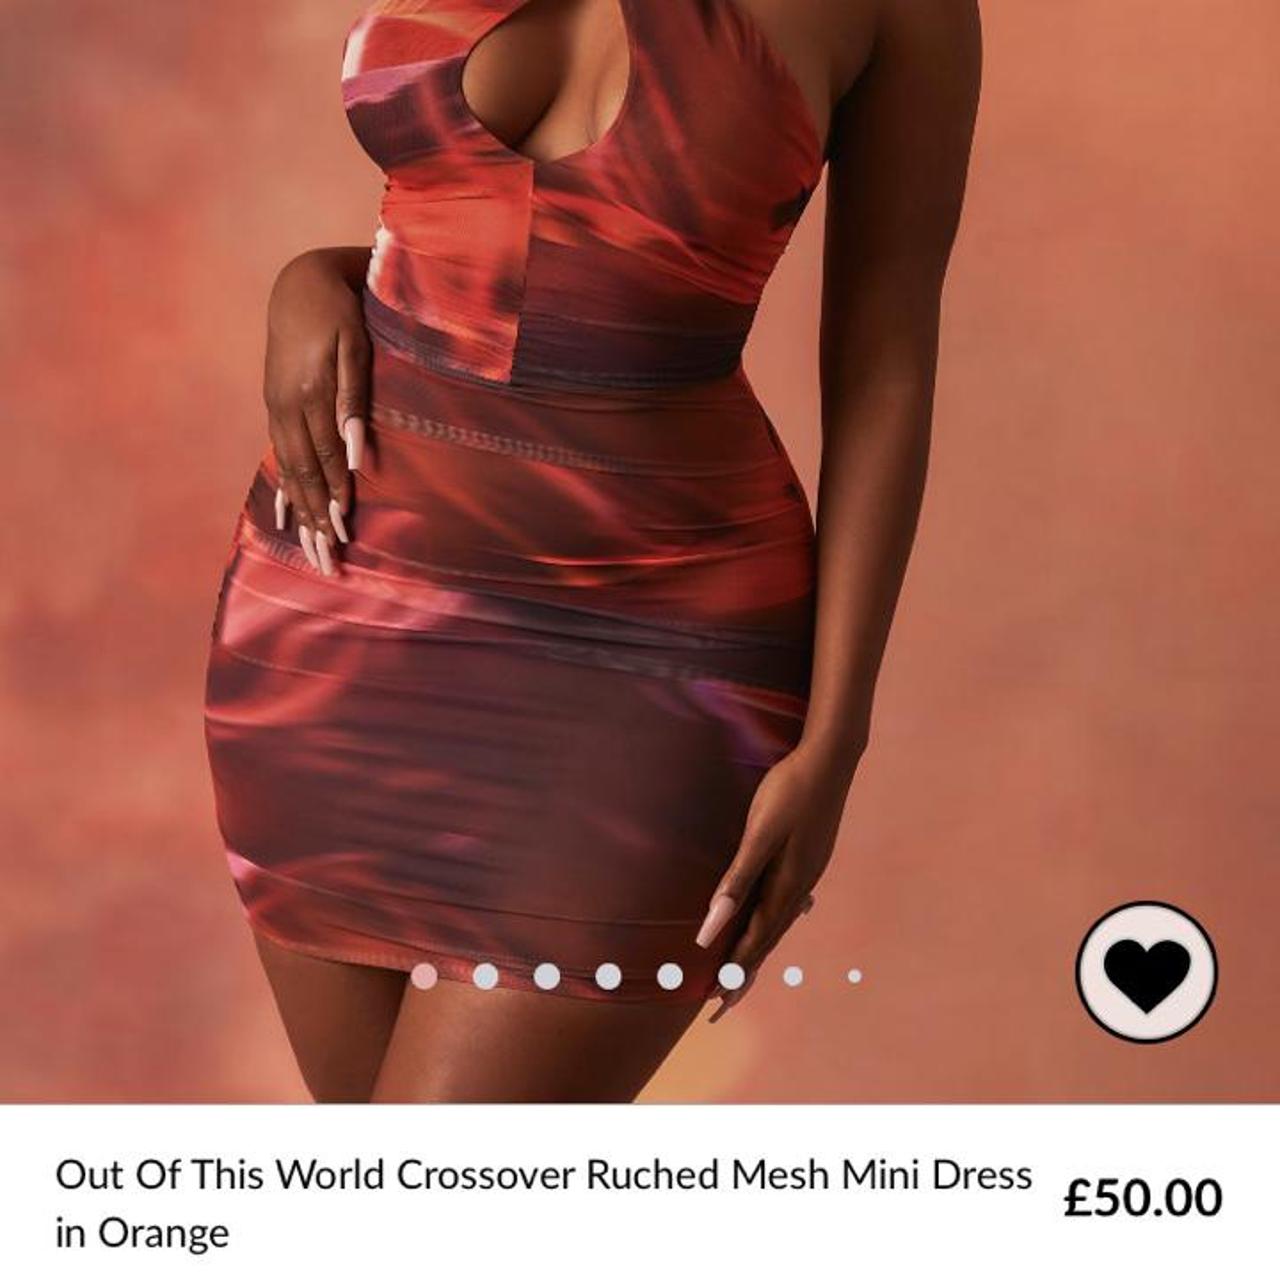 Out Of This World Crossover Ruched Mesh Mini Dress in Orange